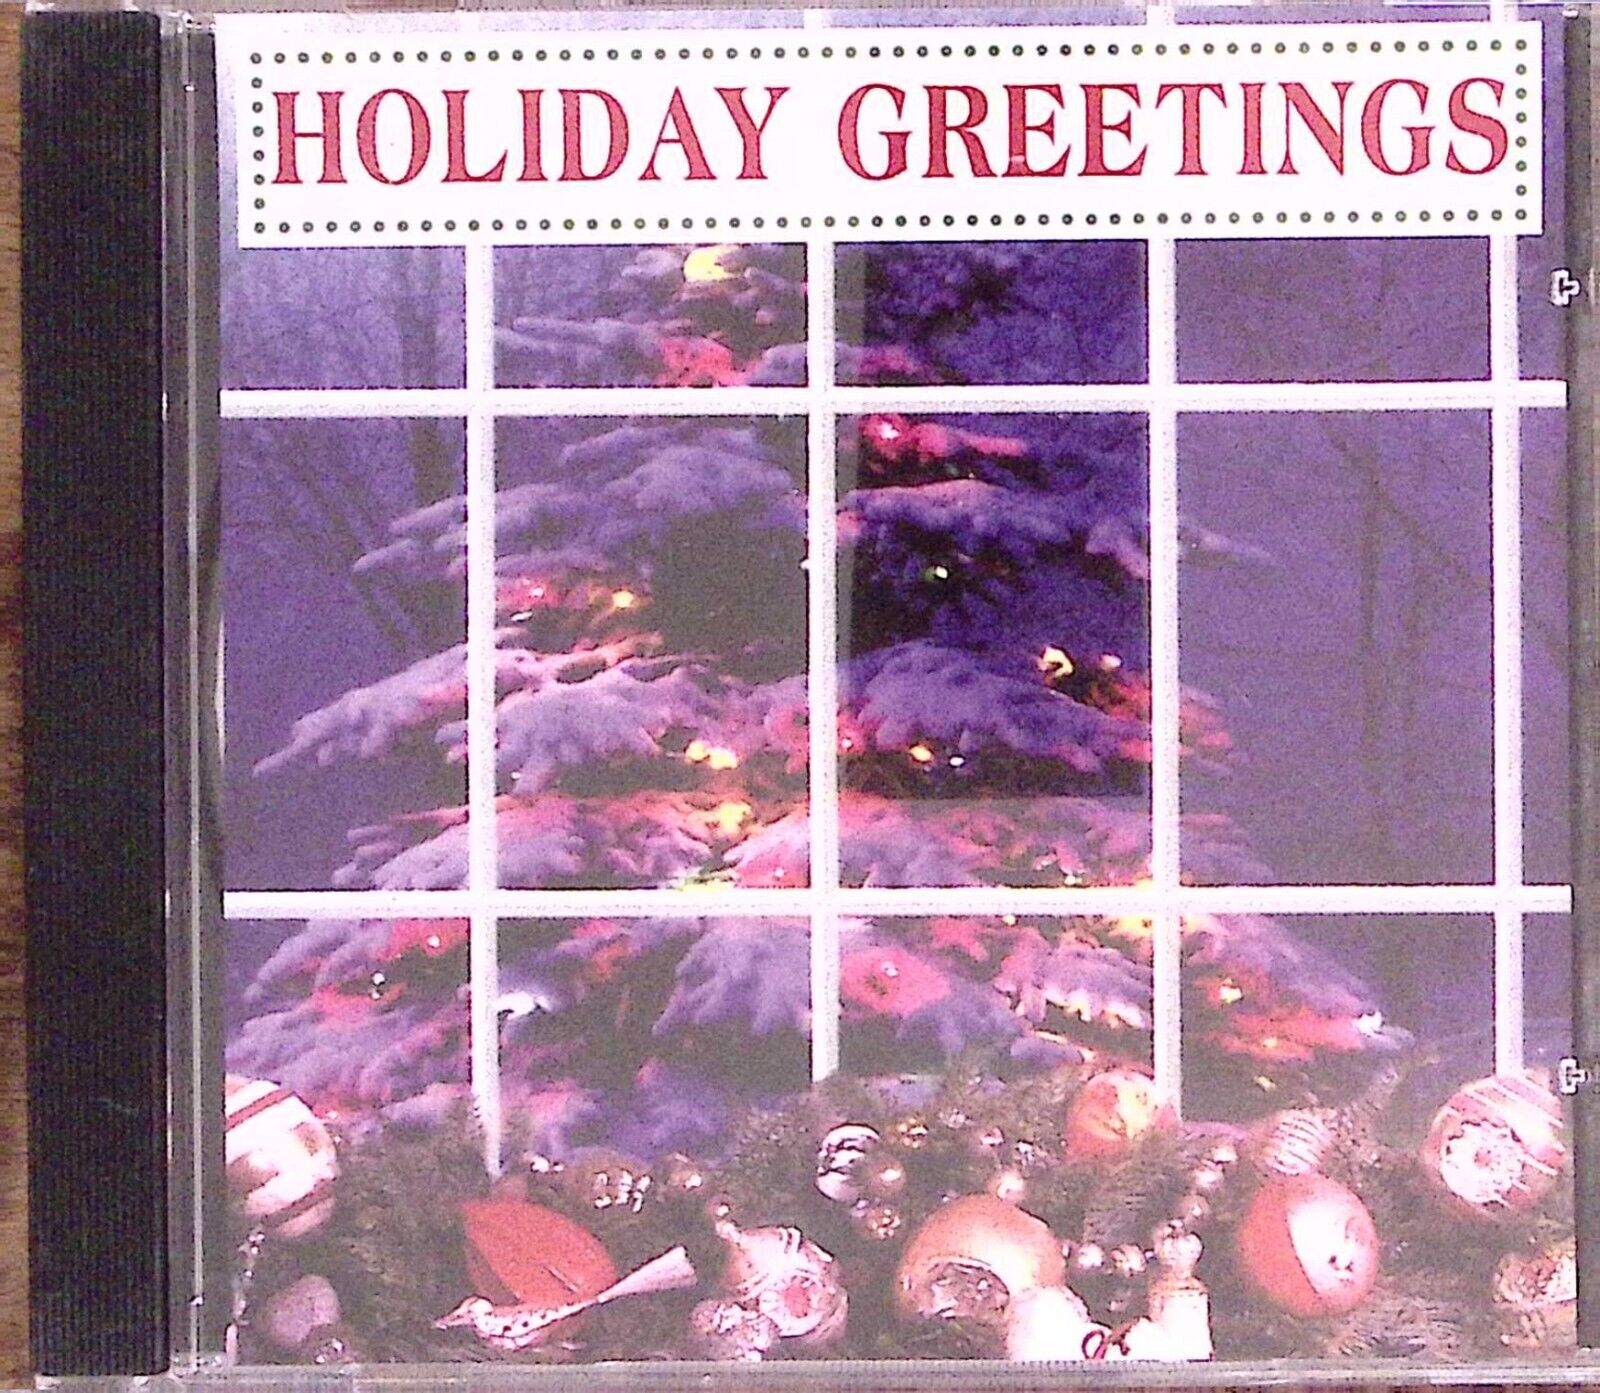 HOLIDAY GREETINGS  MARTIN MEIR  OLDIES BUT GOODIES MUSIC CHRISTMAS CD 2676